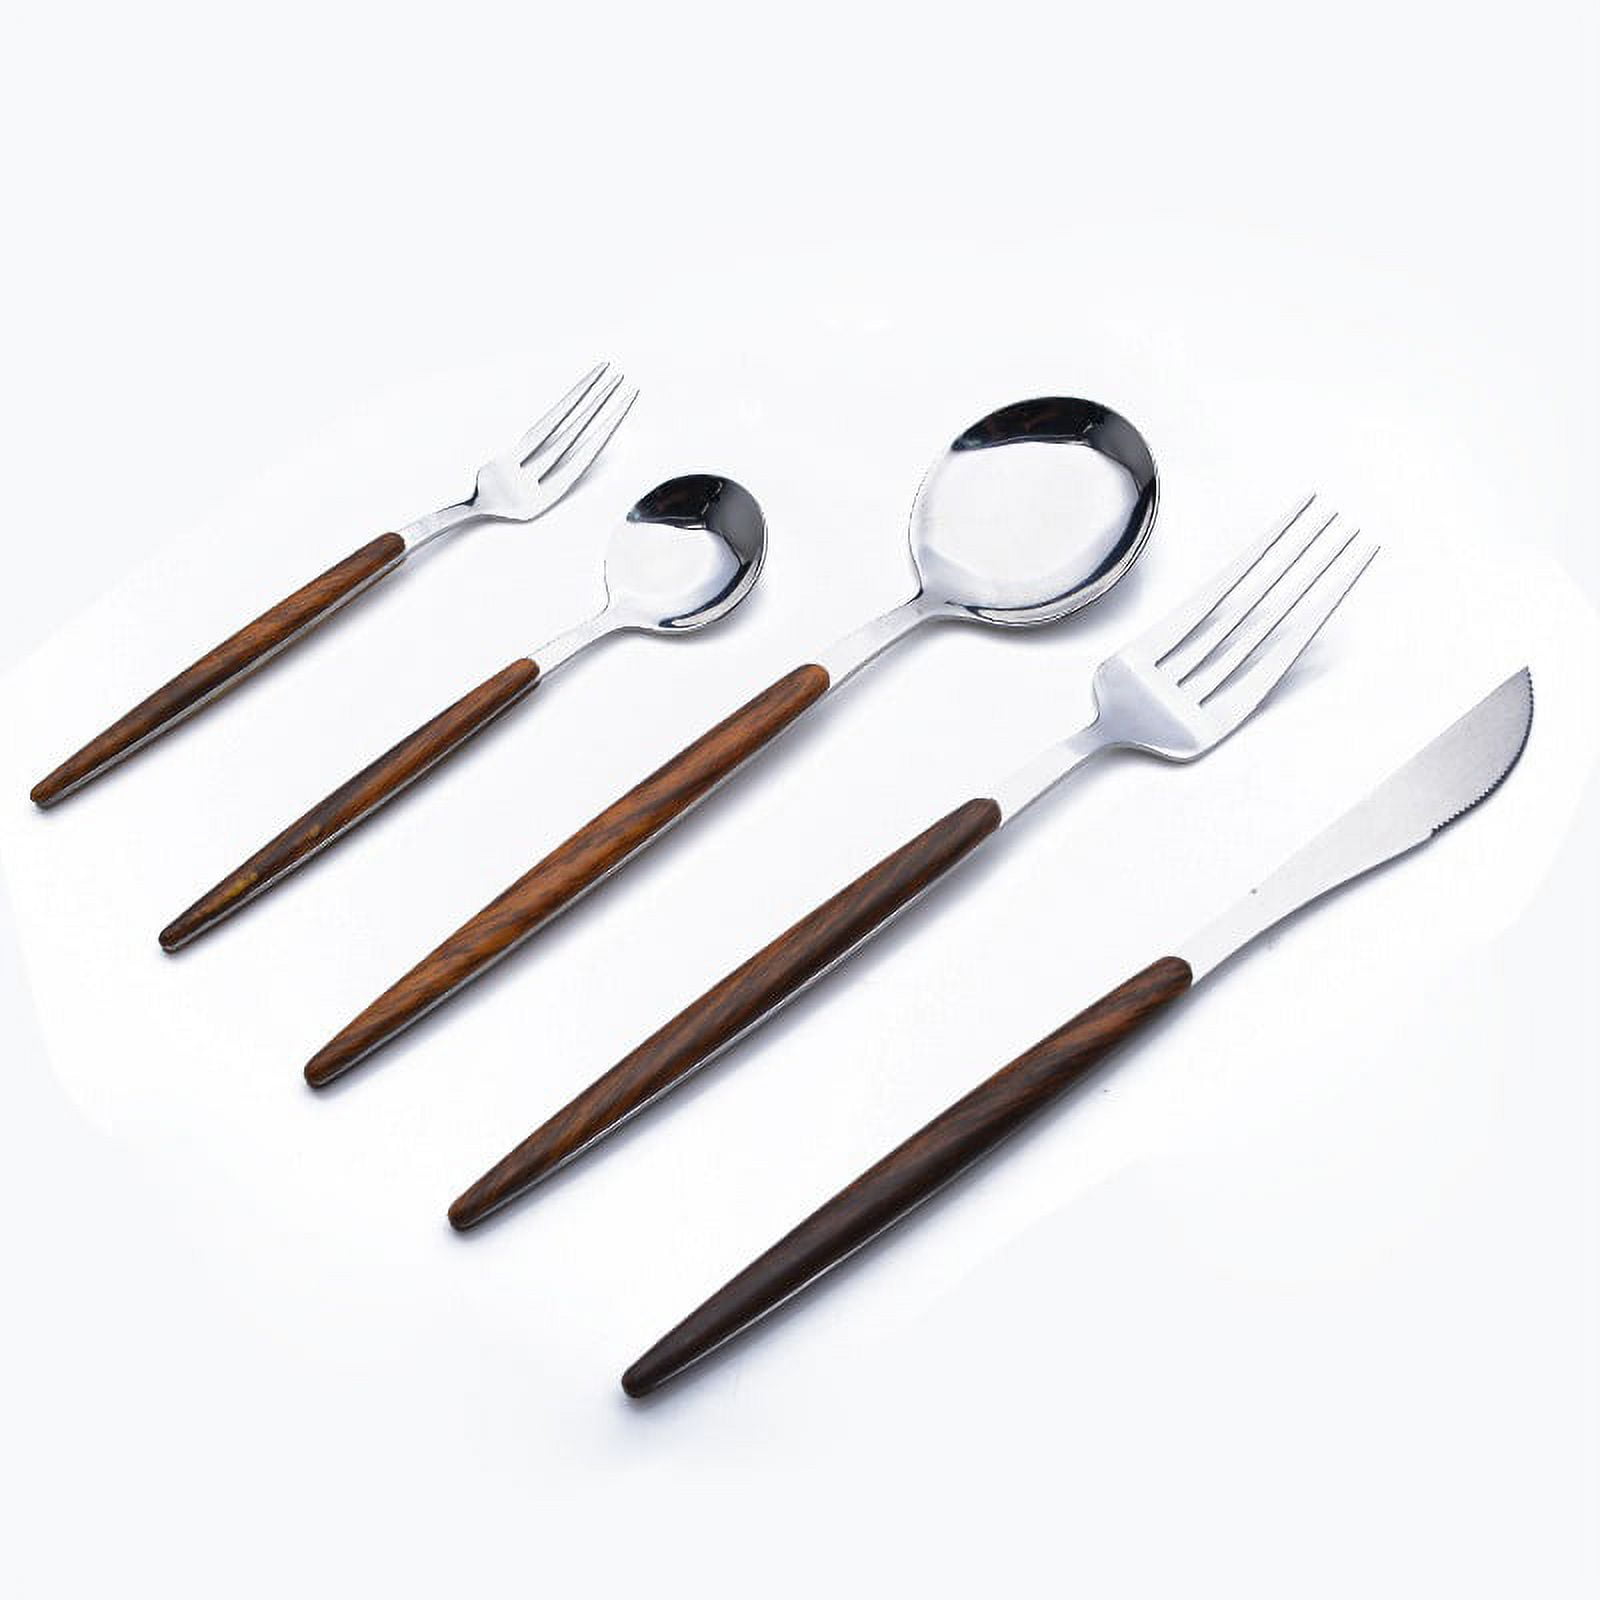 5 Pieces Silverware Flatware Set With Wooden Handle For 2